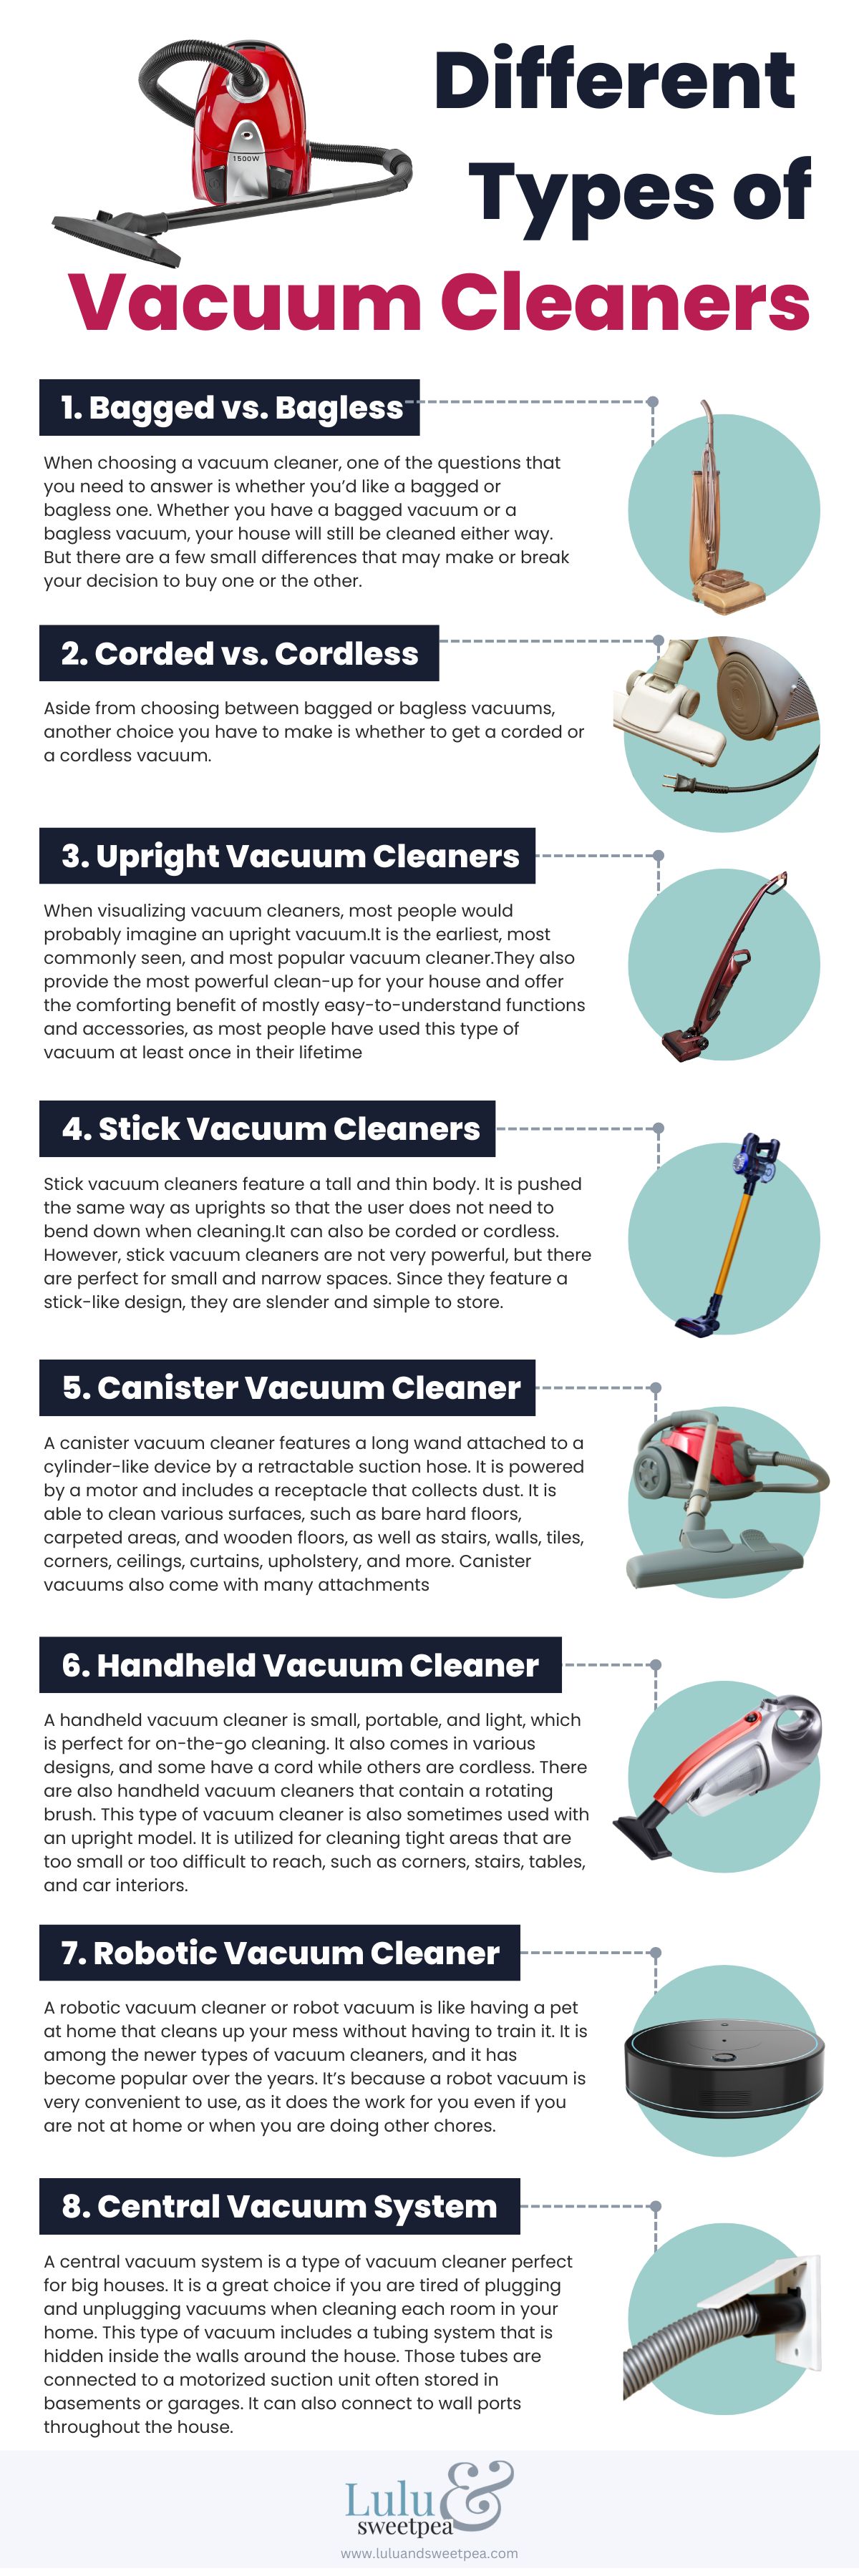 Different Types of Vacuum Cleaners